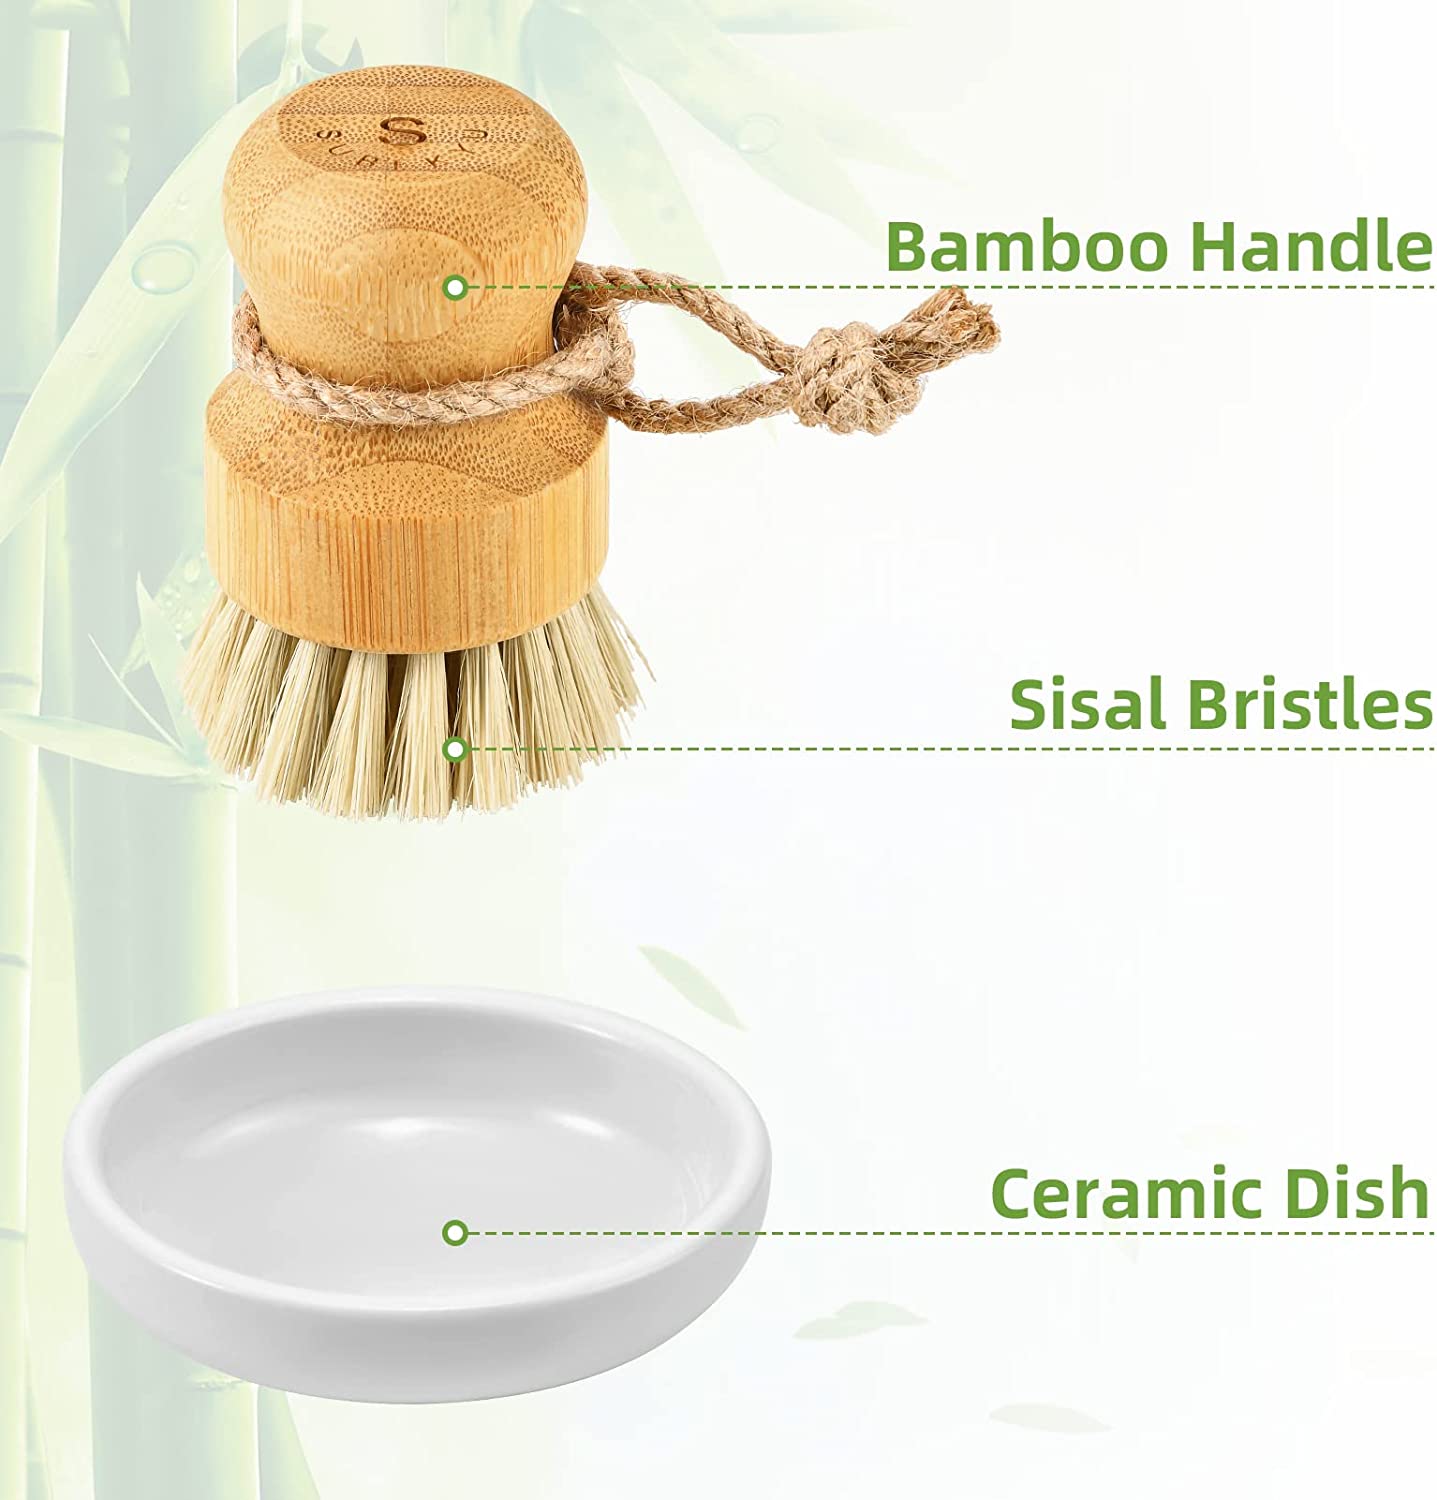 SUBEKYU Bamboo Dish Brush, Kitchen Dish Scrubber Brush with Soap Dispenser,  Natural Wooden Dishwashing Brush for Cleaning Dishes/Pans/Pots, Built-in